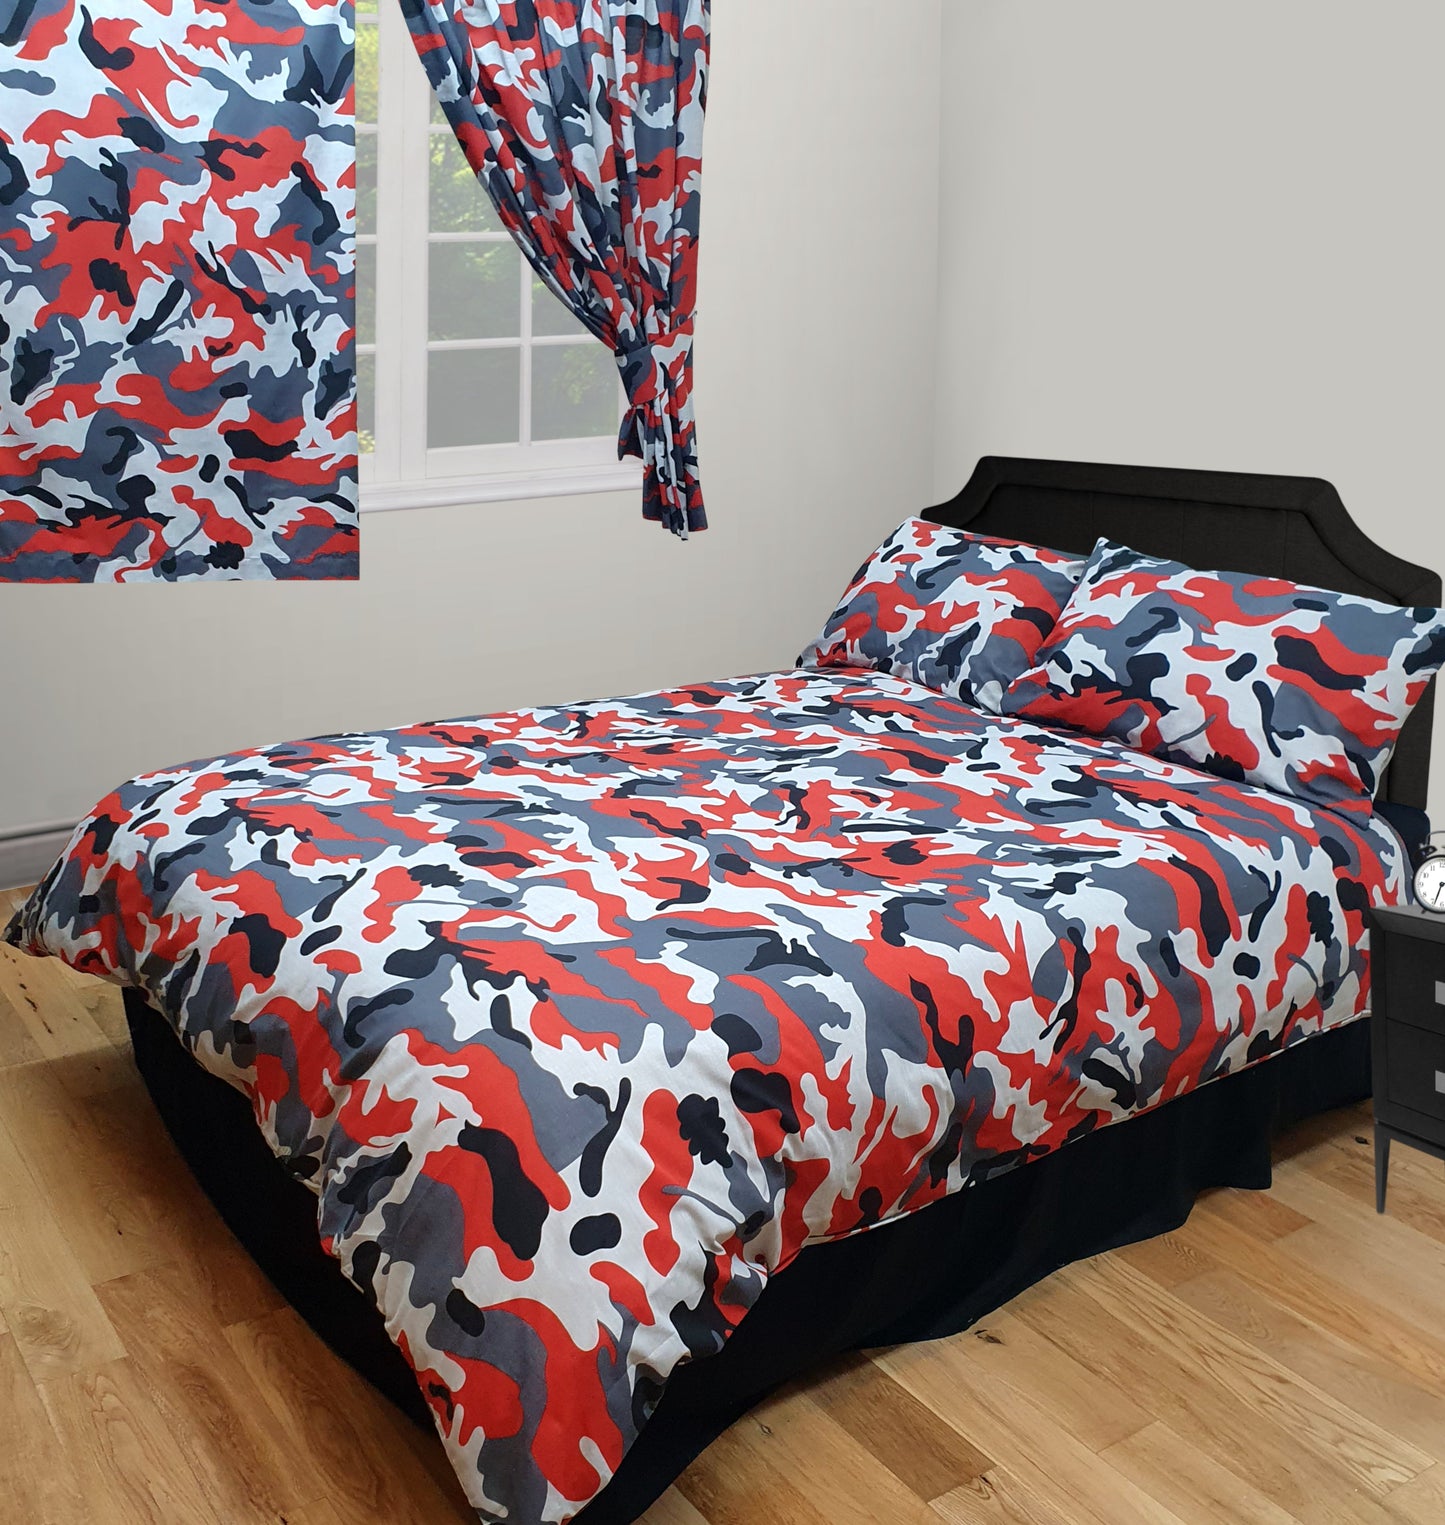 Double Bed Camouflage Red Black White Duvet Cover Set Army Bedding Set